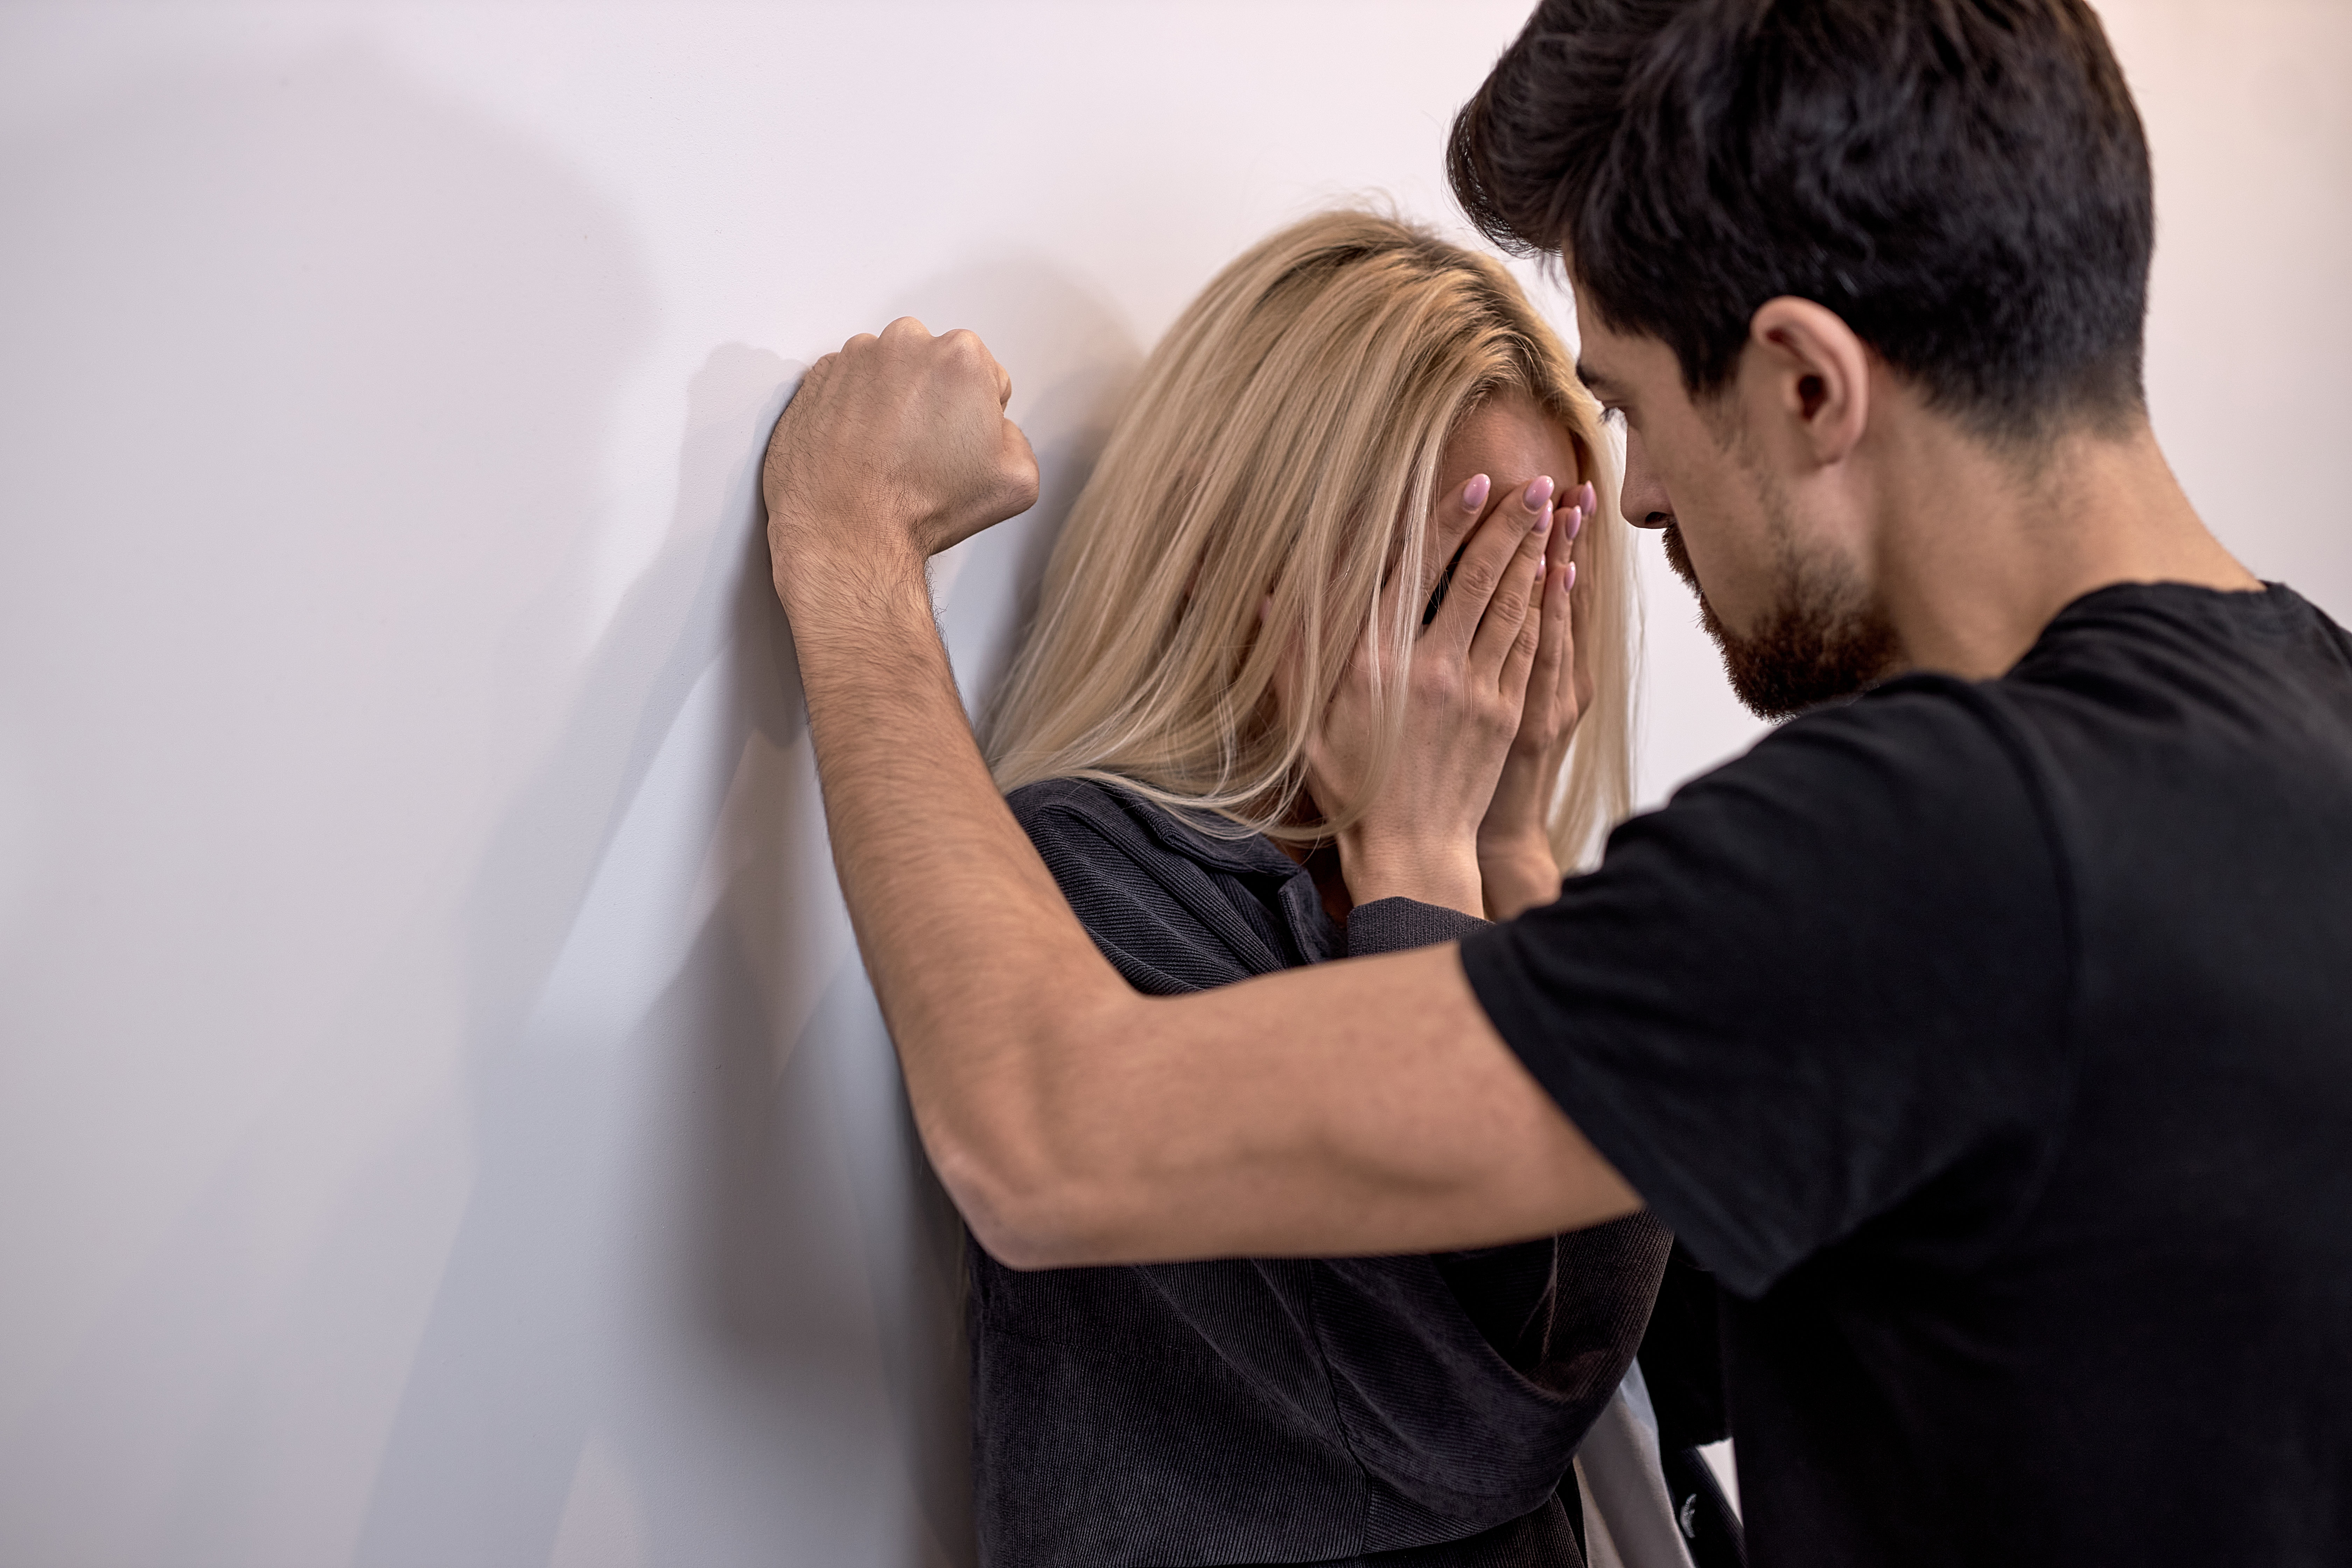 A woman standing against a wall hides her face while a man stands in front of her with his arm on the wall | Source: Shutterstock